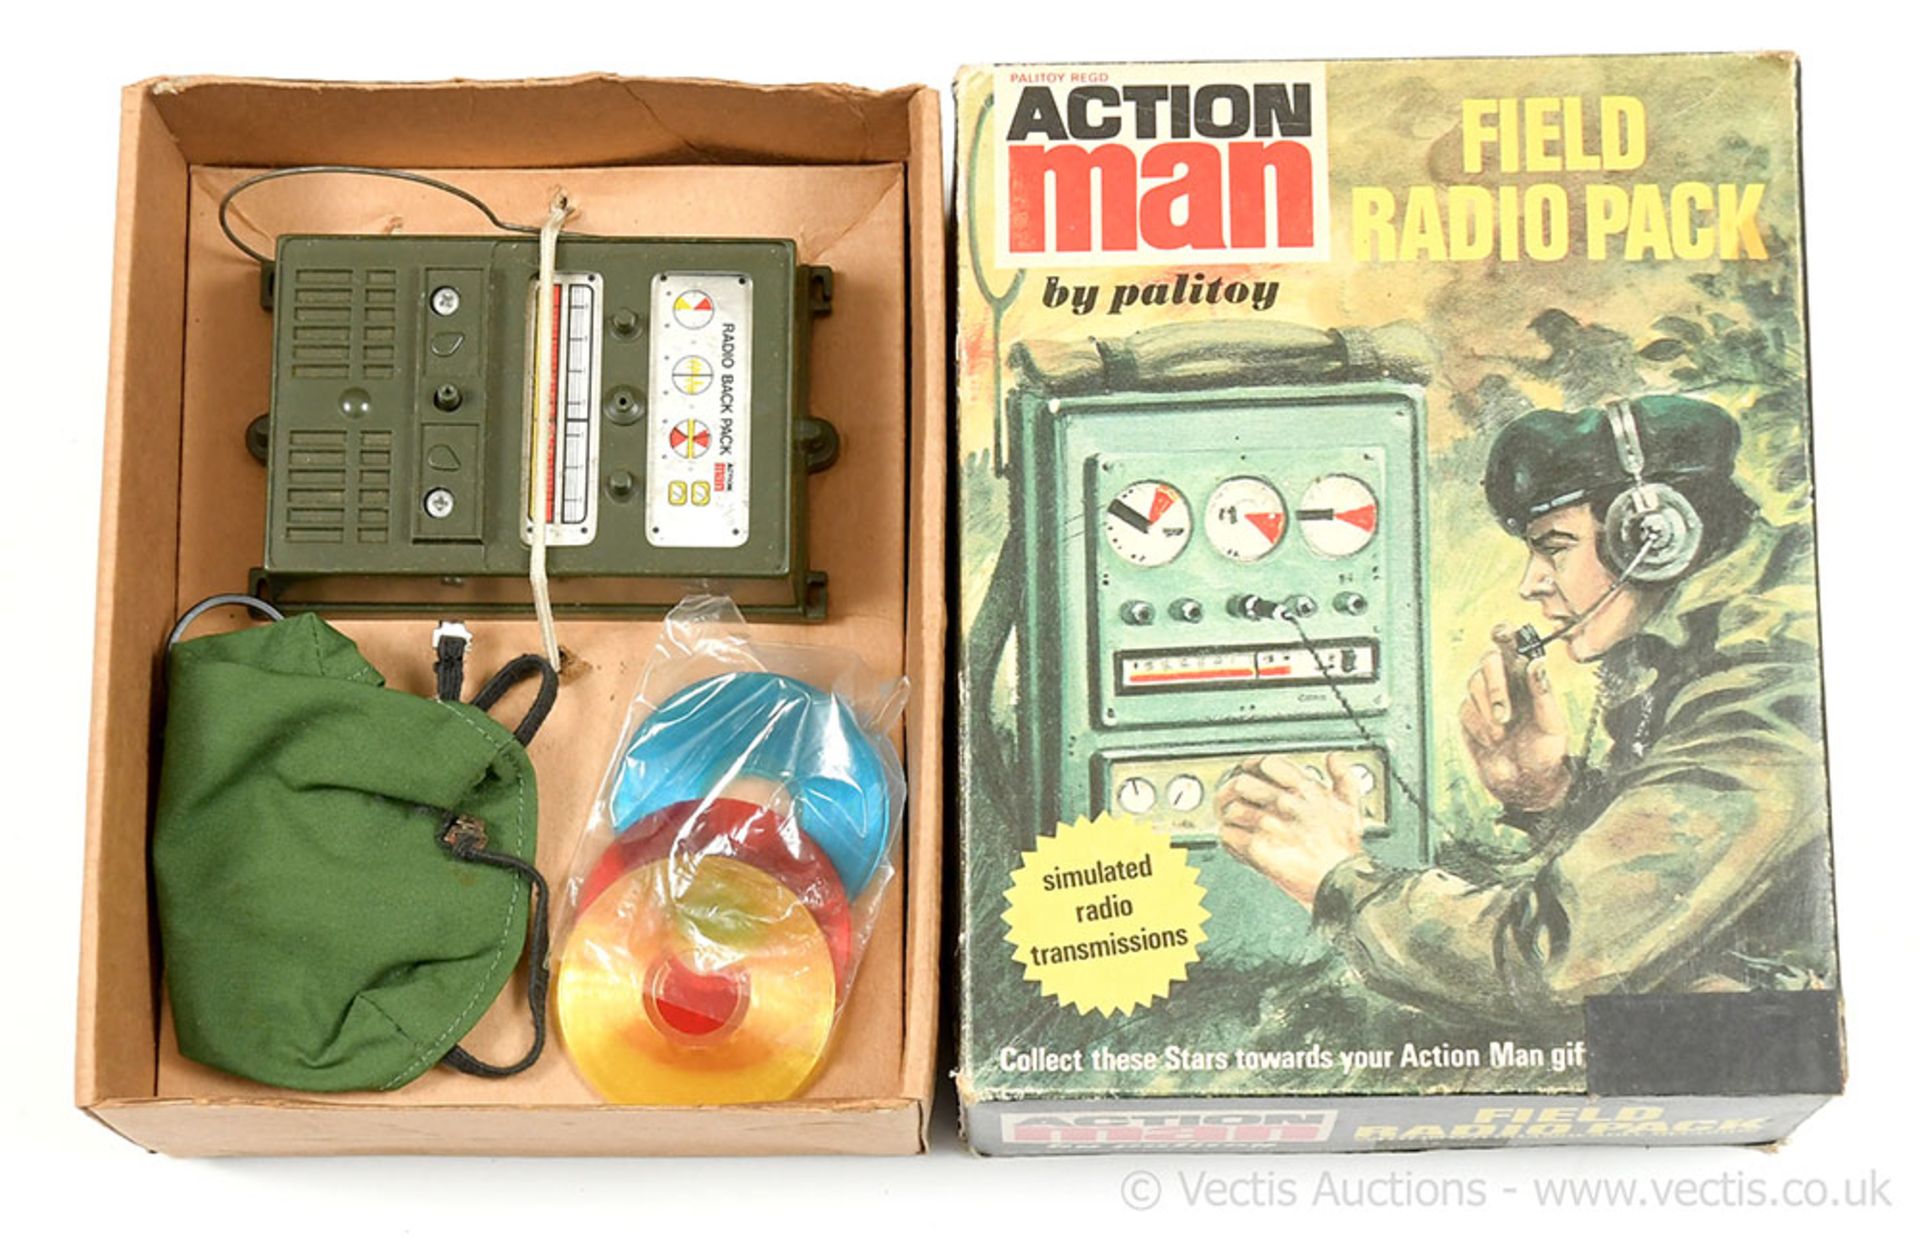 Palitoy Action Man Vintage Field Radio Pack